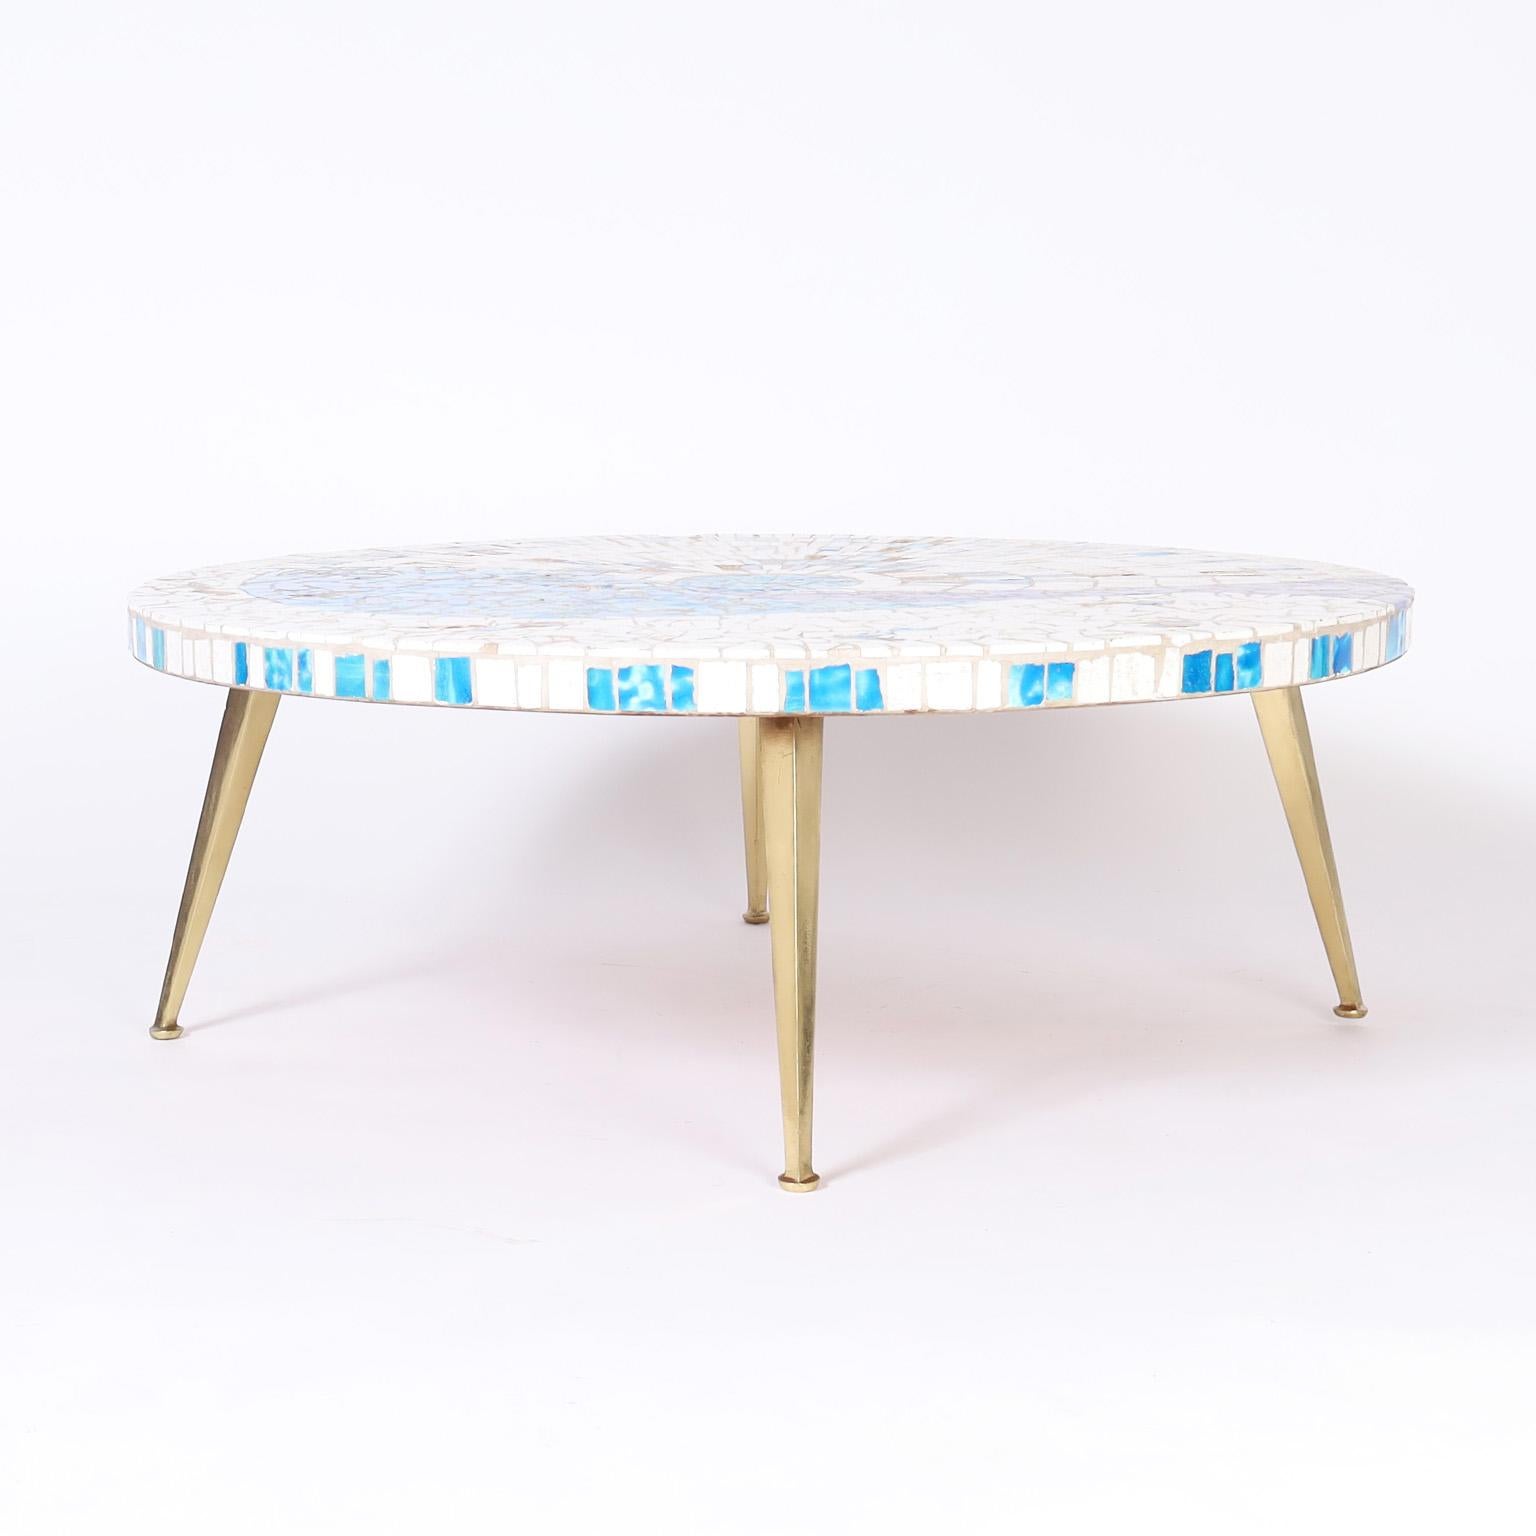 Striking mid century round coffee table with a mosaic tile top having an alluring stylized aquatic motif on elegant tapered brass legs.